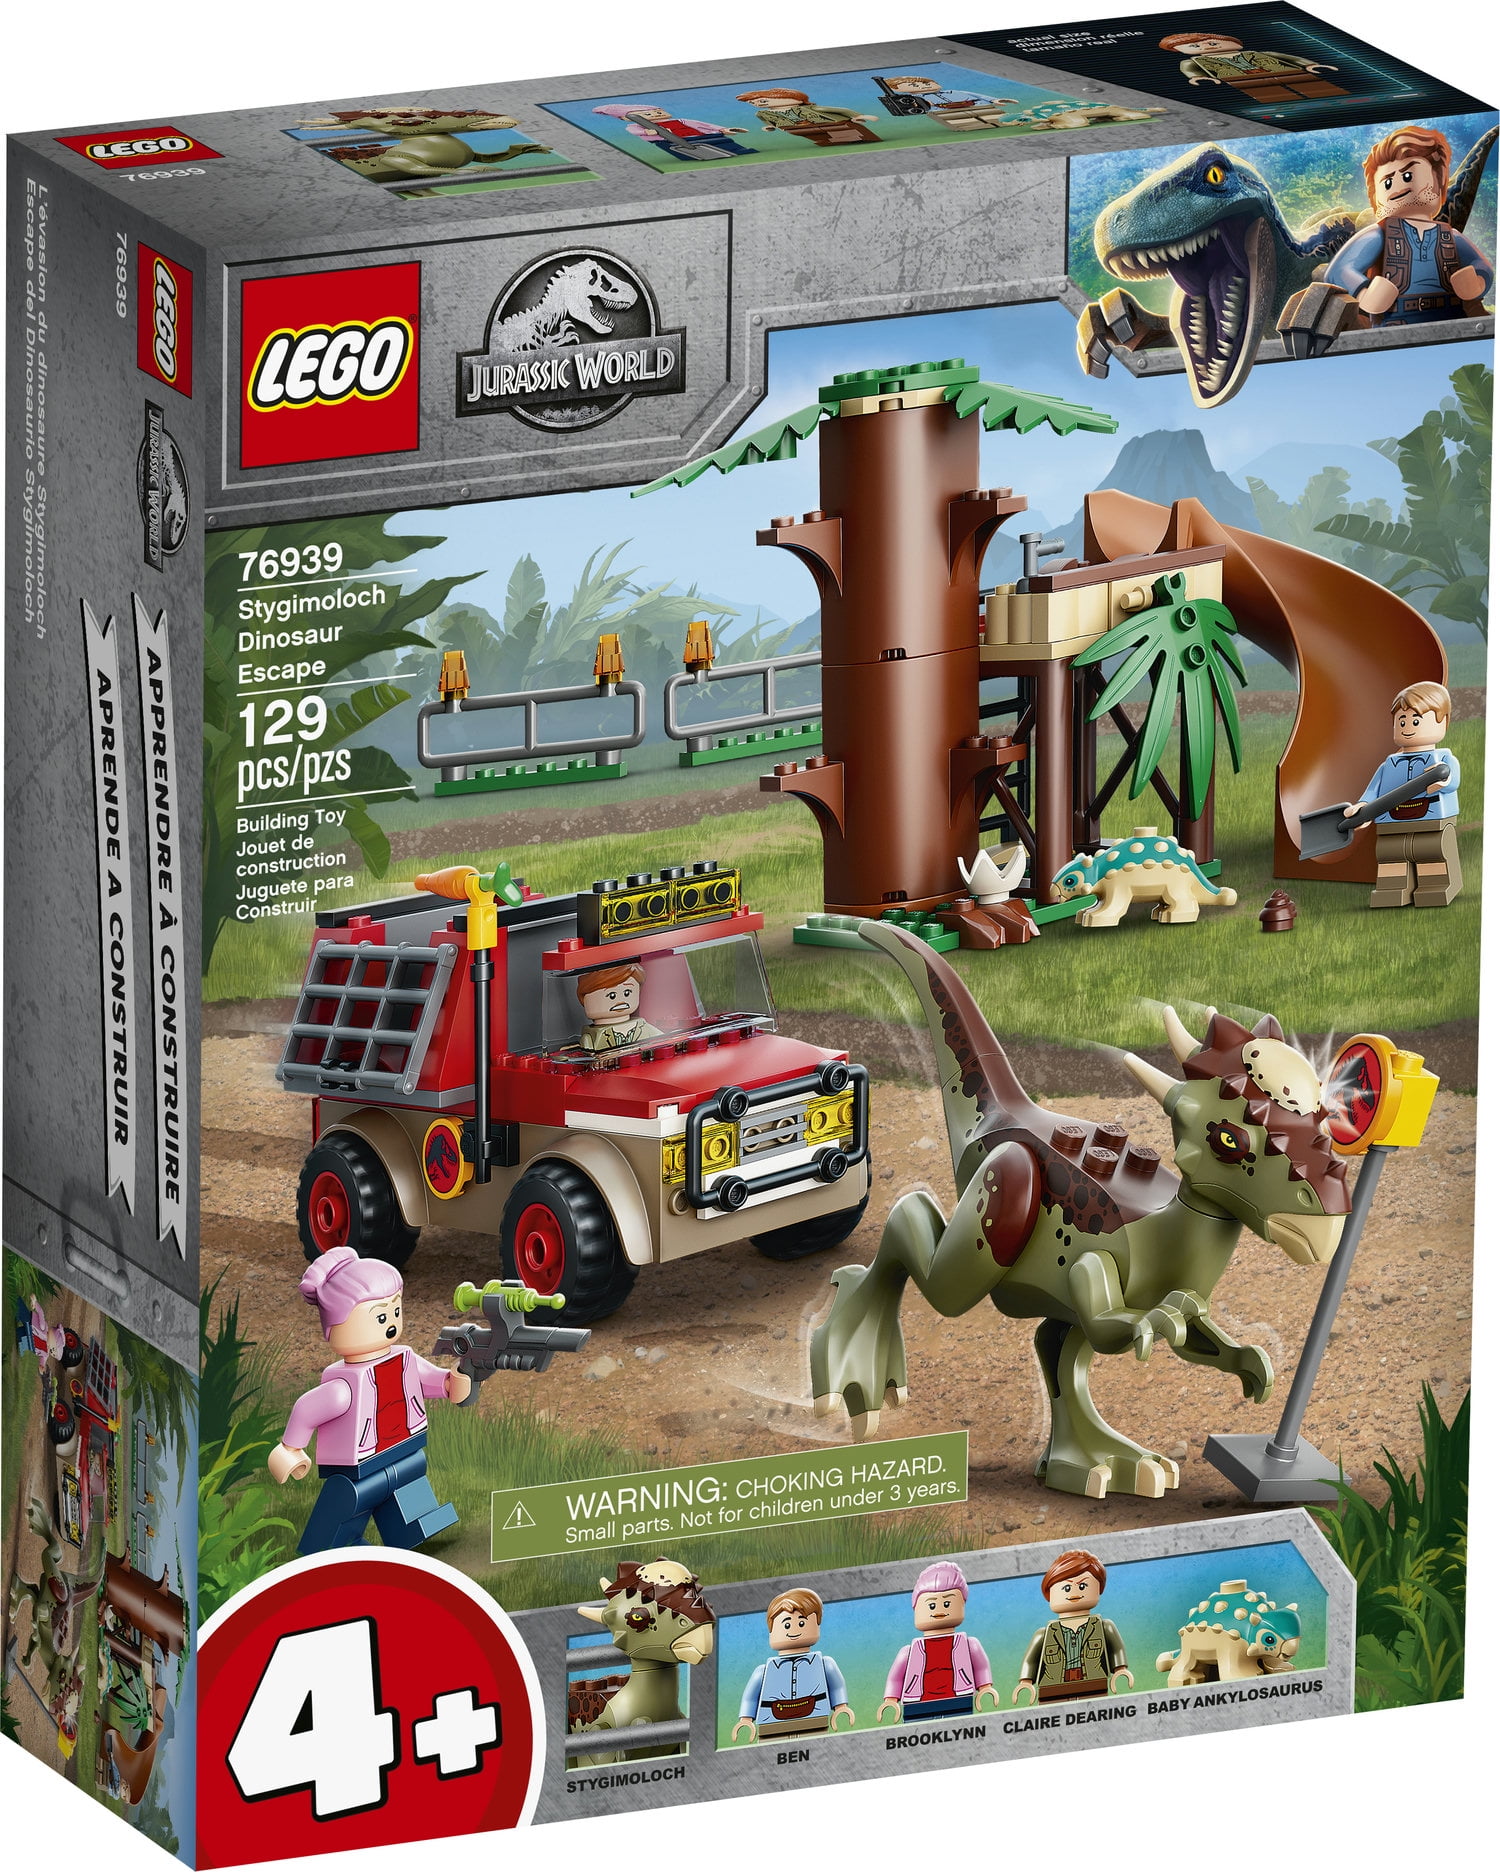  LEGO Jurassic World Carnotaurus Dinosaur Chase 76941 Building  Kit; Fun Toy Playset for Creative Kids; New 2021 (240 Pieces) : Toys & Games